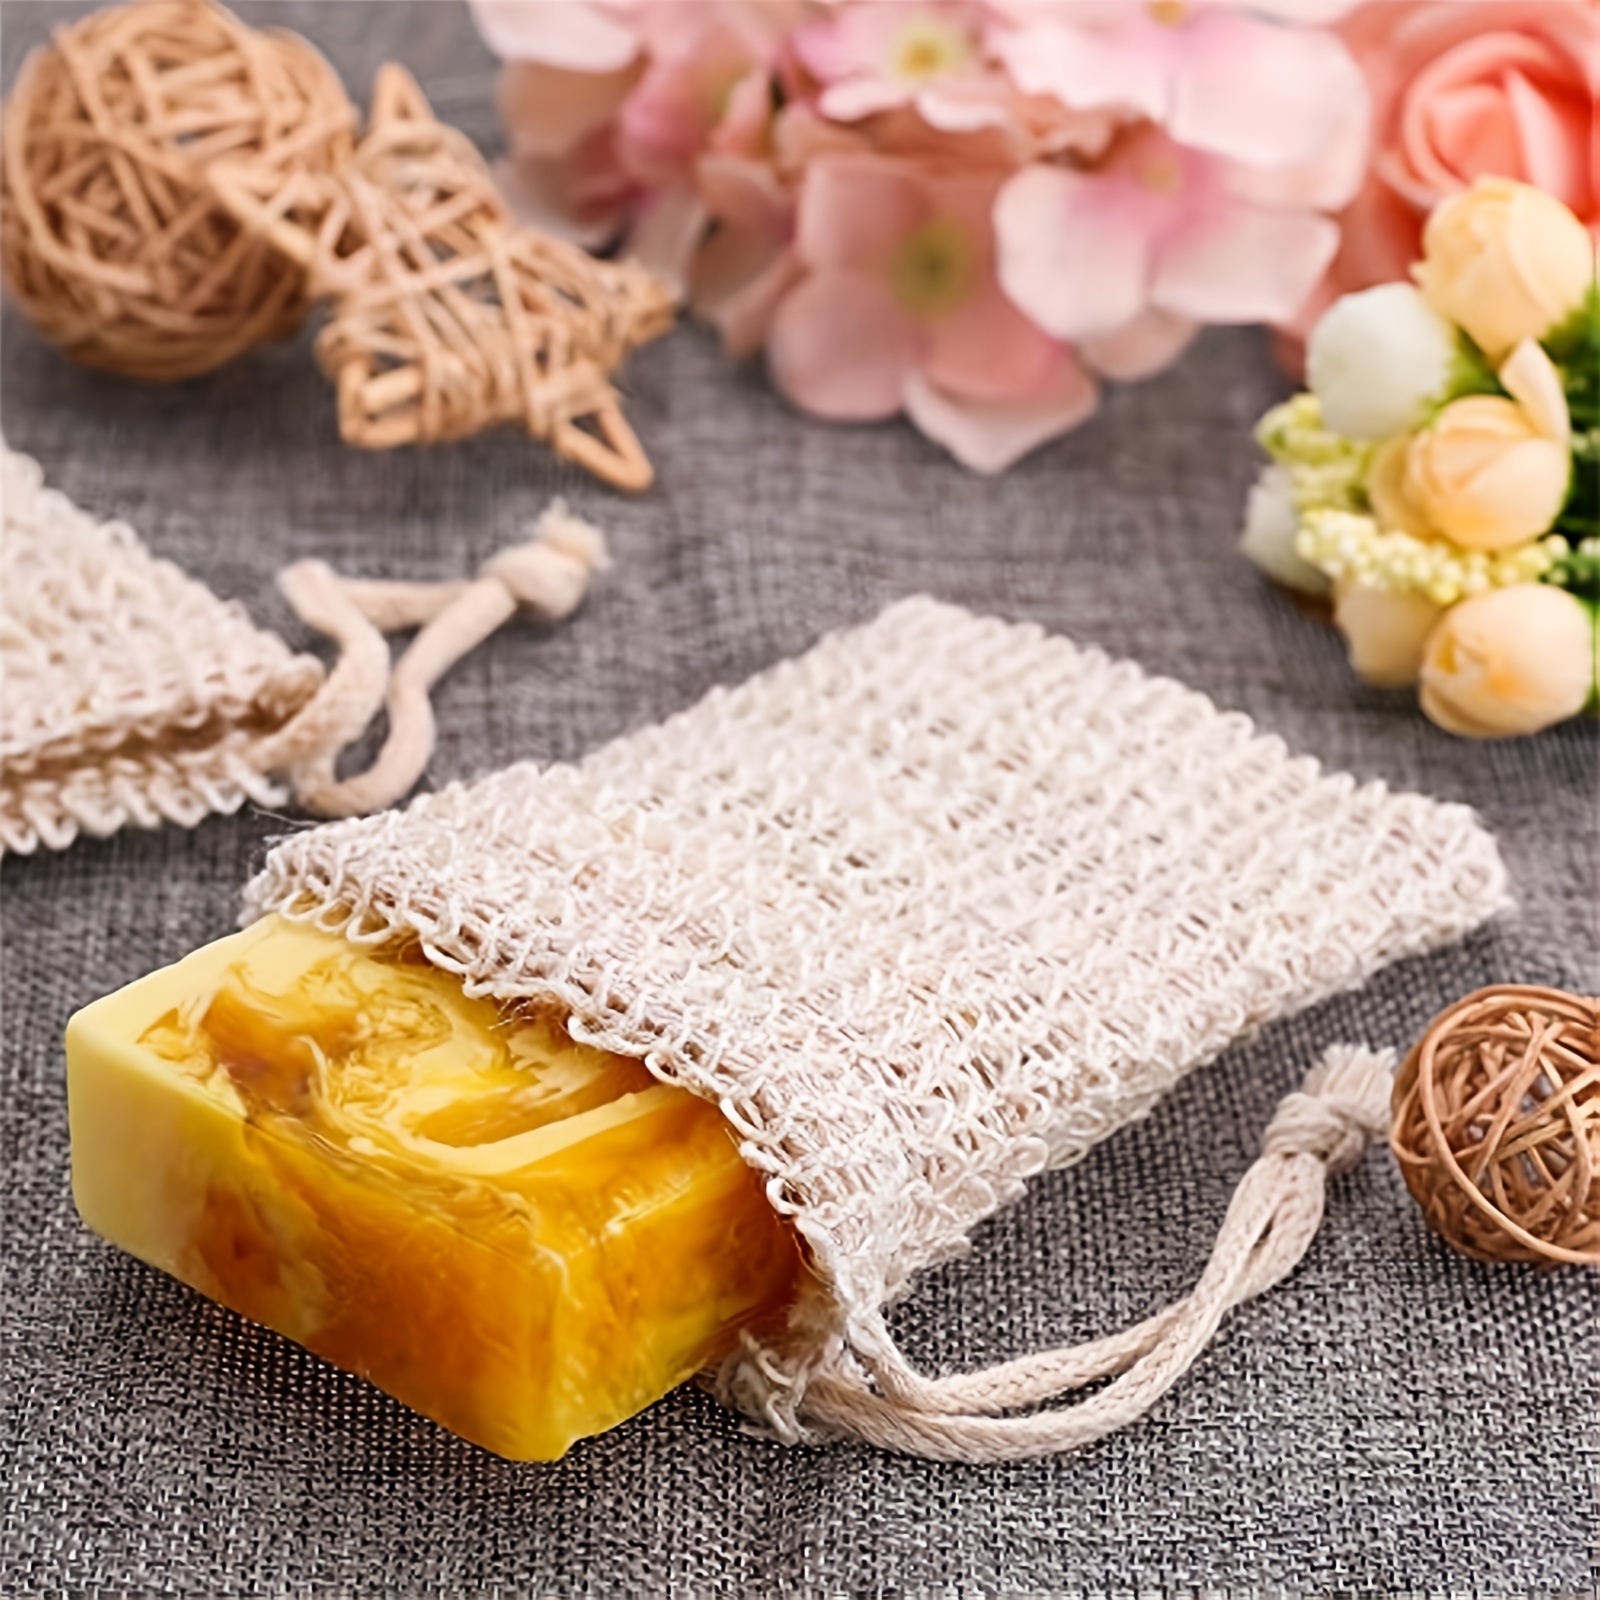 

10 Pieces Soap Saver Bag Natural Sisal Exfoliating Soap Pouch For Foaming And Drying The Soap Bars Shower Soap Bag